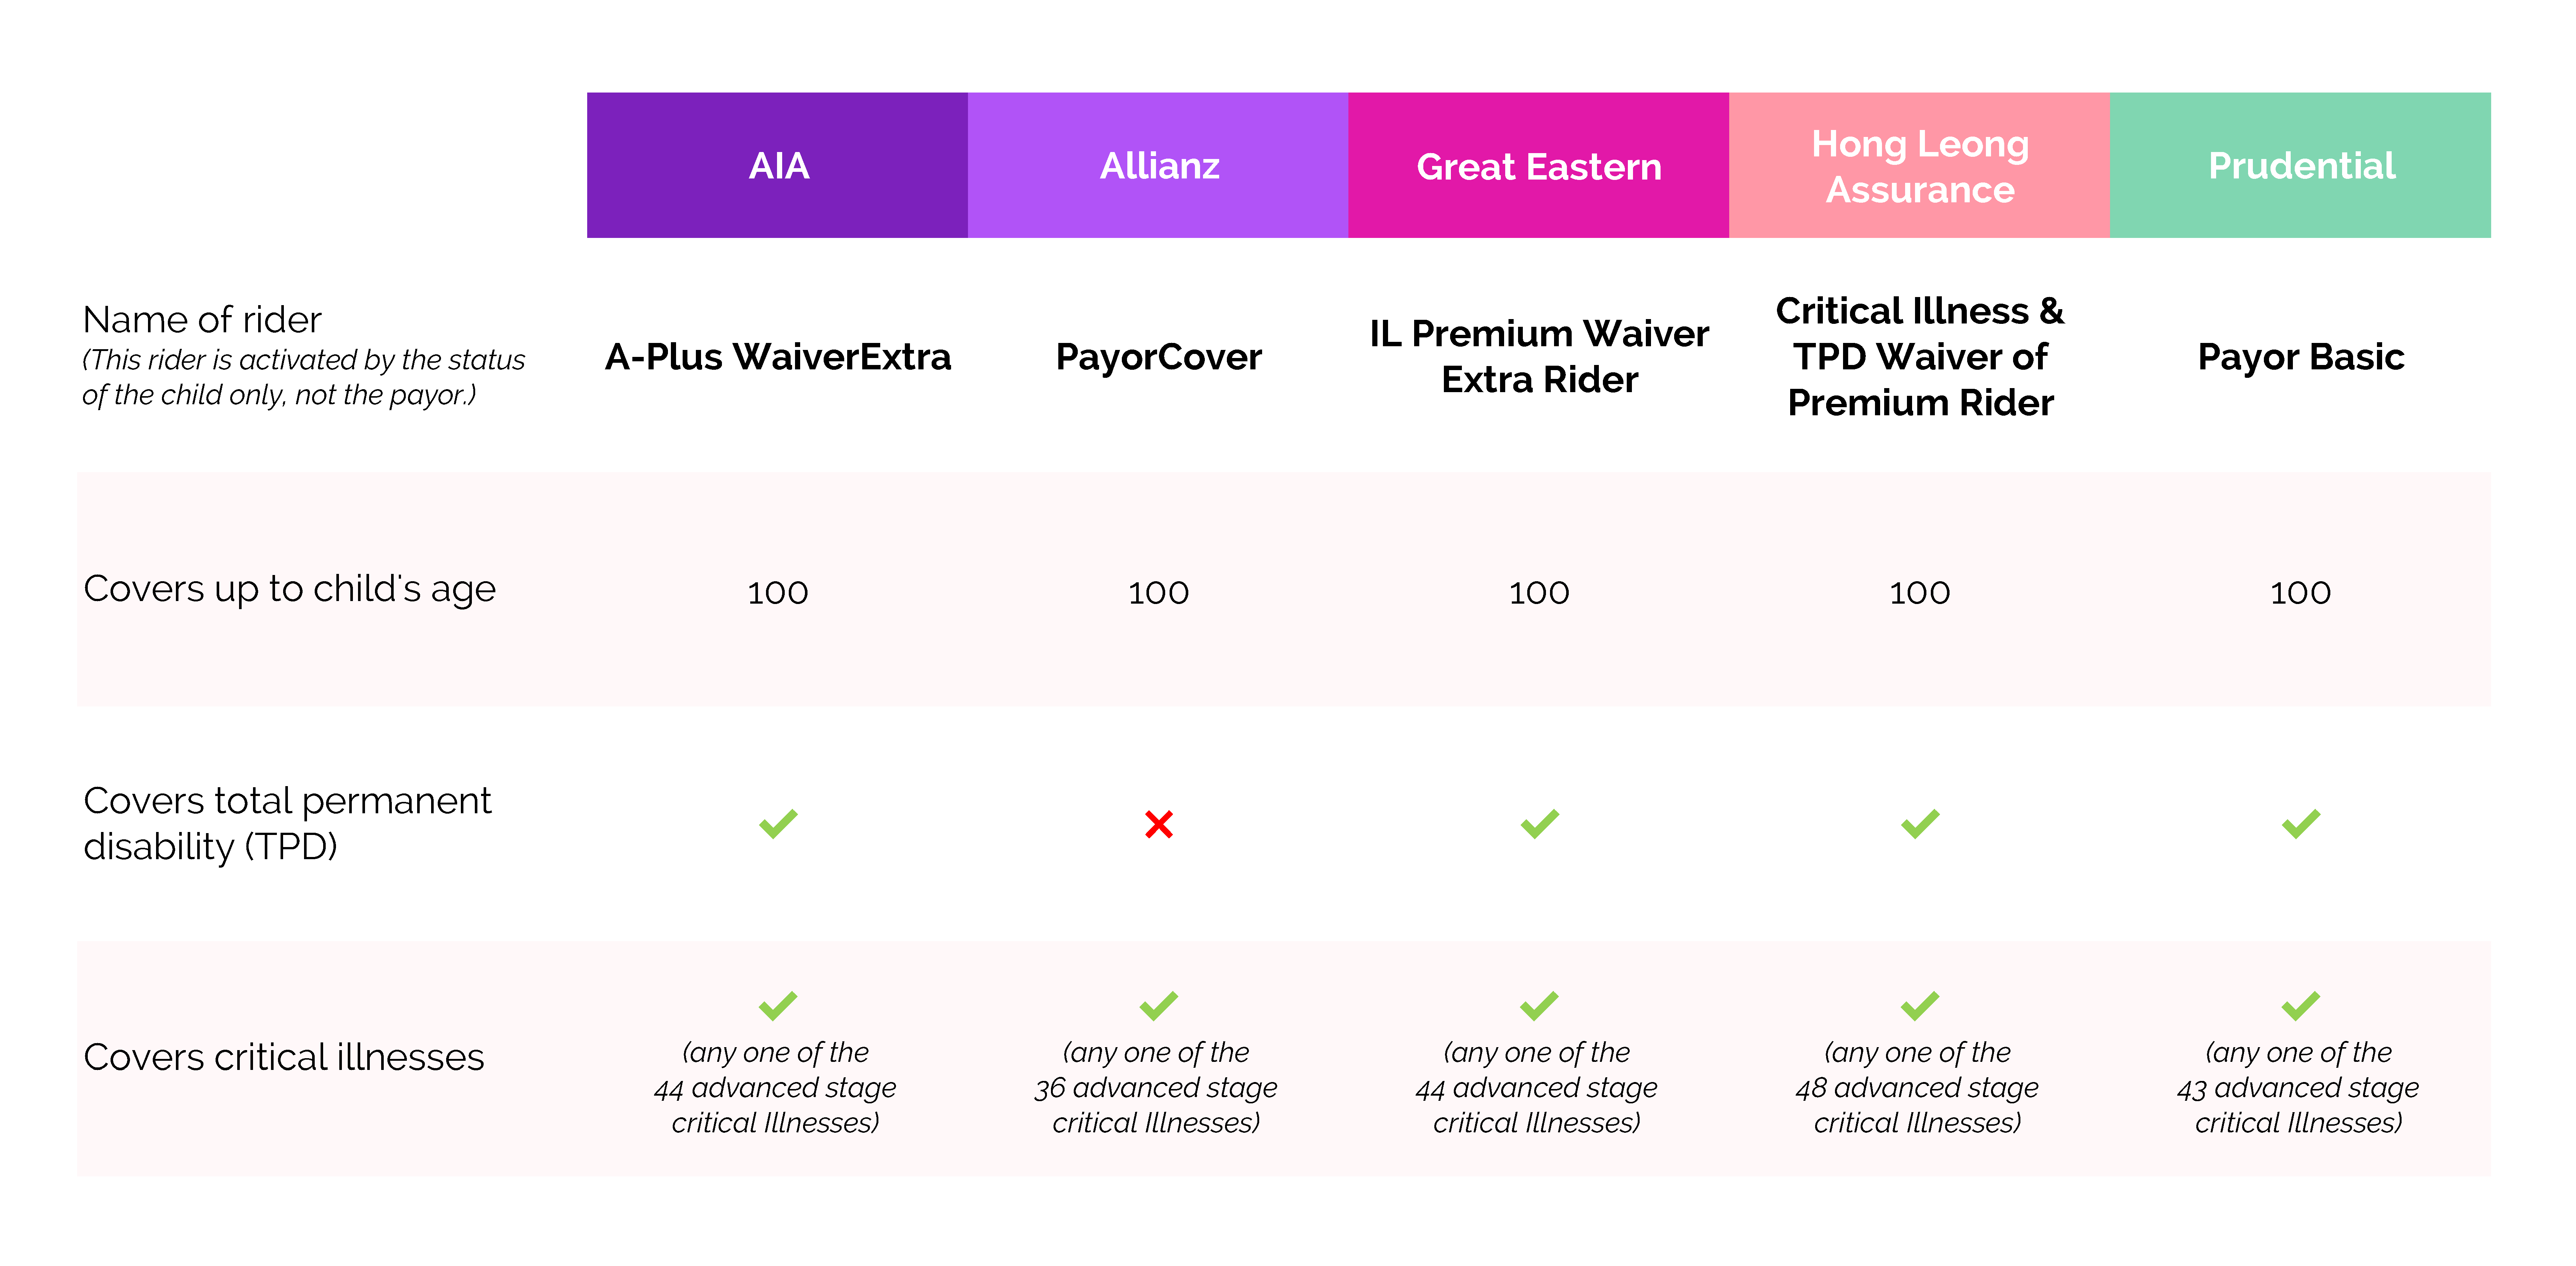 A summary and comparison of premium waiver riders (based on status of child) from AIA, Allianz, Great Eastern, Hong Leong Assurance and Prudential